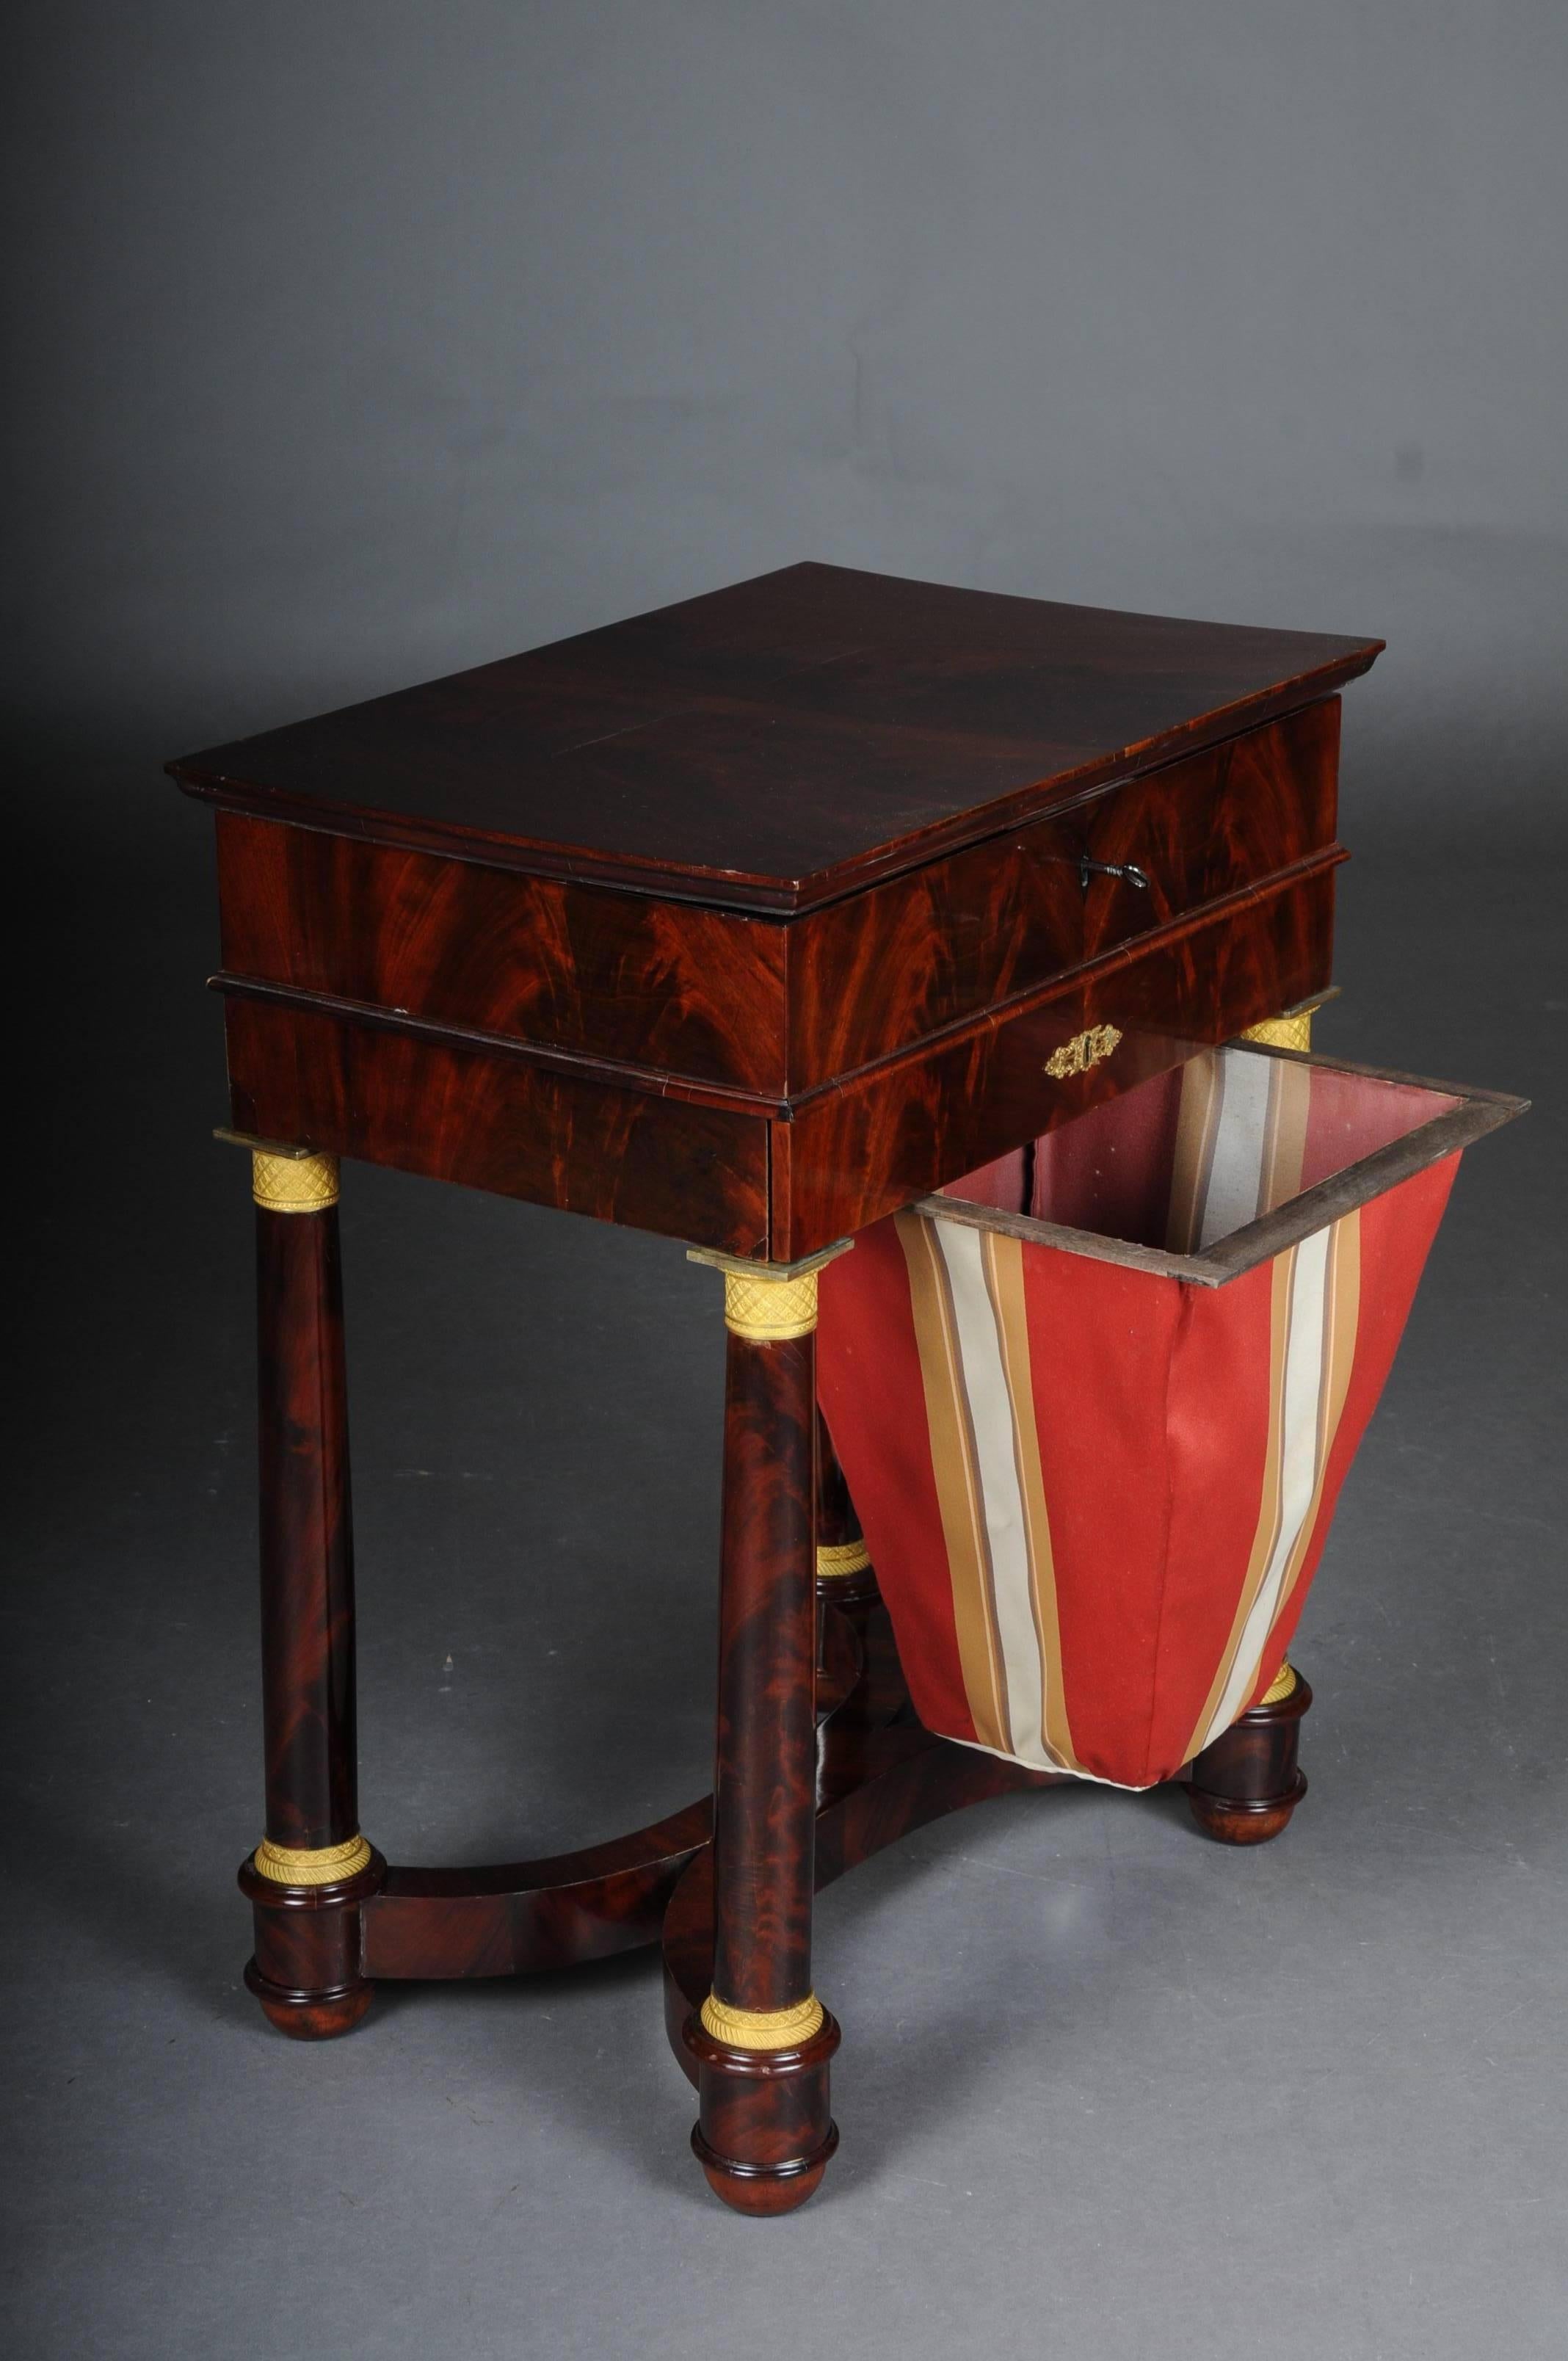 Early 19th Century Antique Empire Sewing Table, Paris, circa 1810